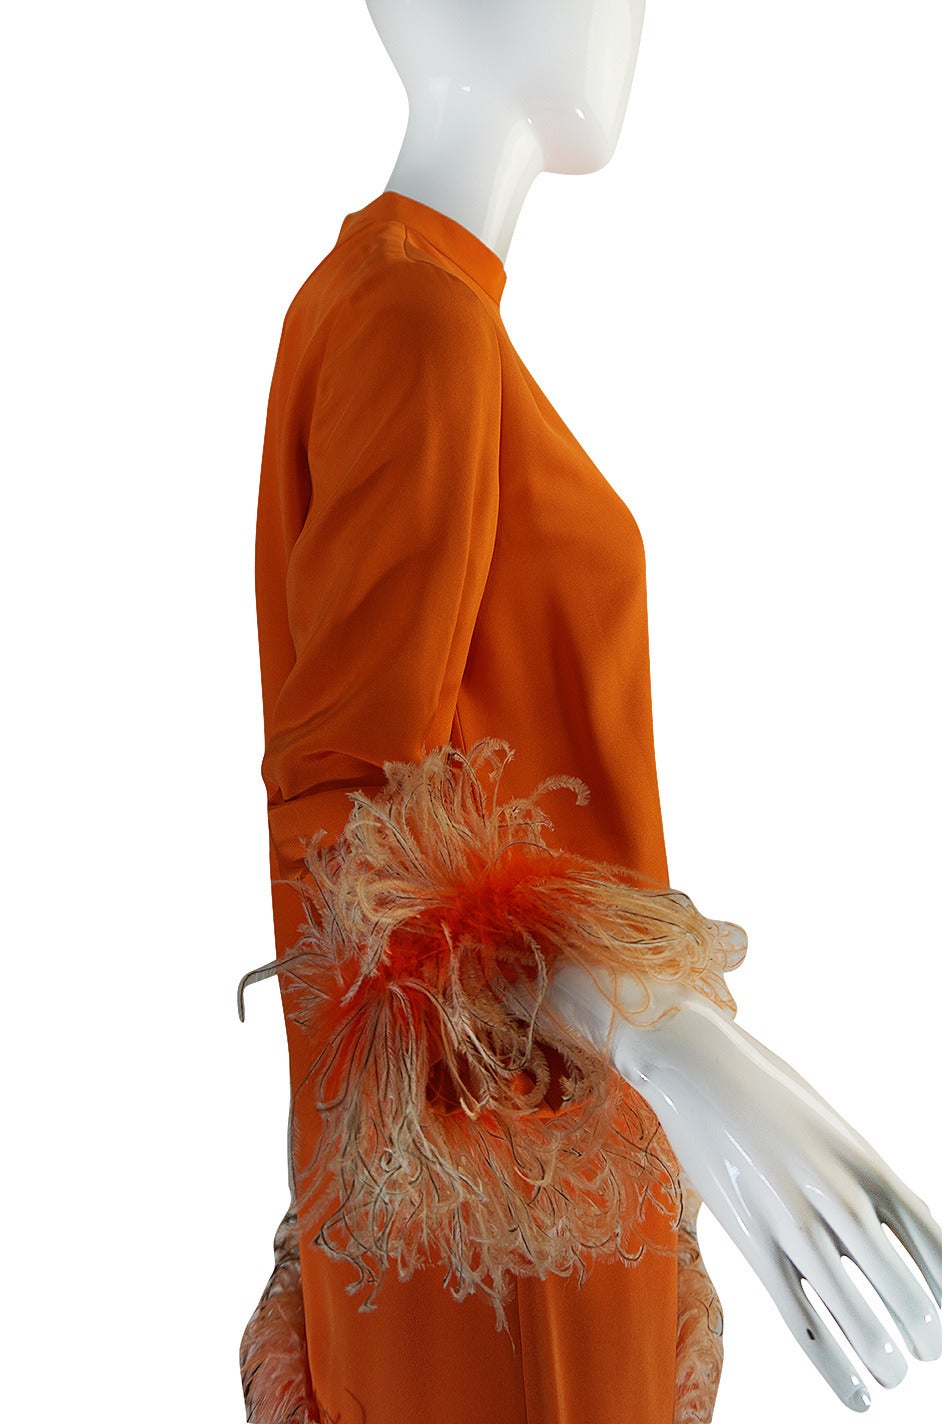 This absolutely stunning, silk & feather dress is by Geoffey Beene, who one of my favorite American designers. This is made to demi-couture standards and it shows. It is a fantastical combination of a bright orange-coral silk with amazing feather